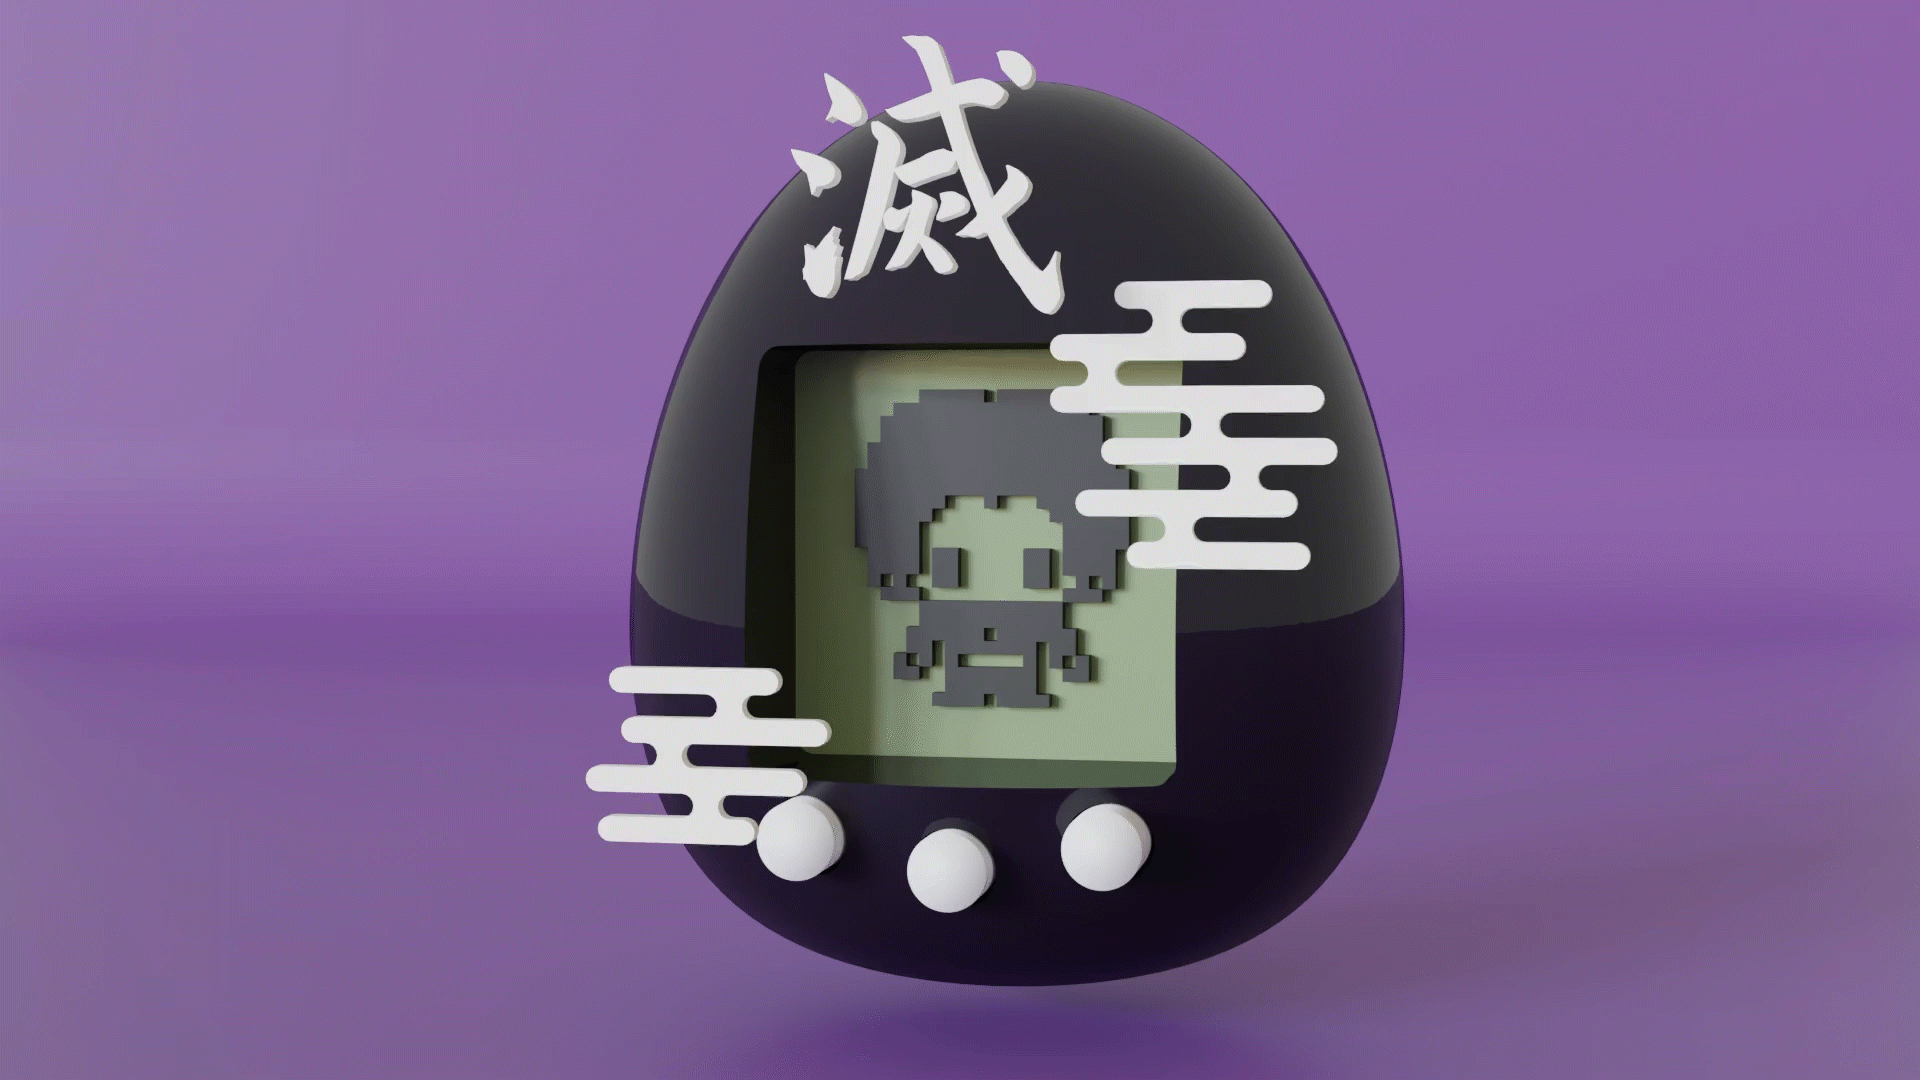 An animated gif of a Demon Slayer tamagotchi, an egg-shaped toy, with a small man moving around on an in-set screen. Clouds and the kanji for 'extermination' float around the toy.